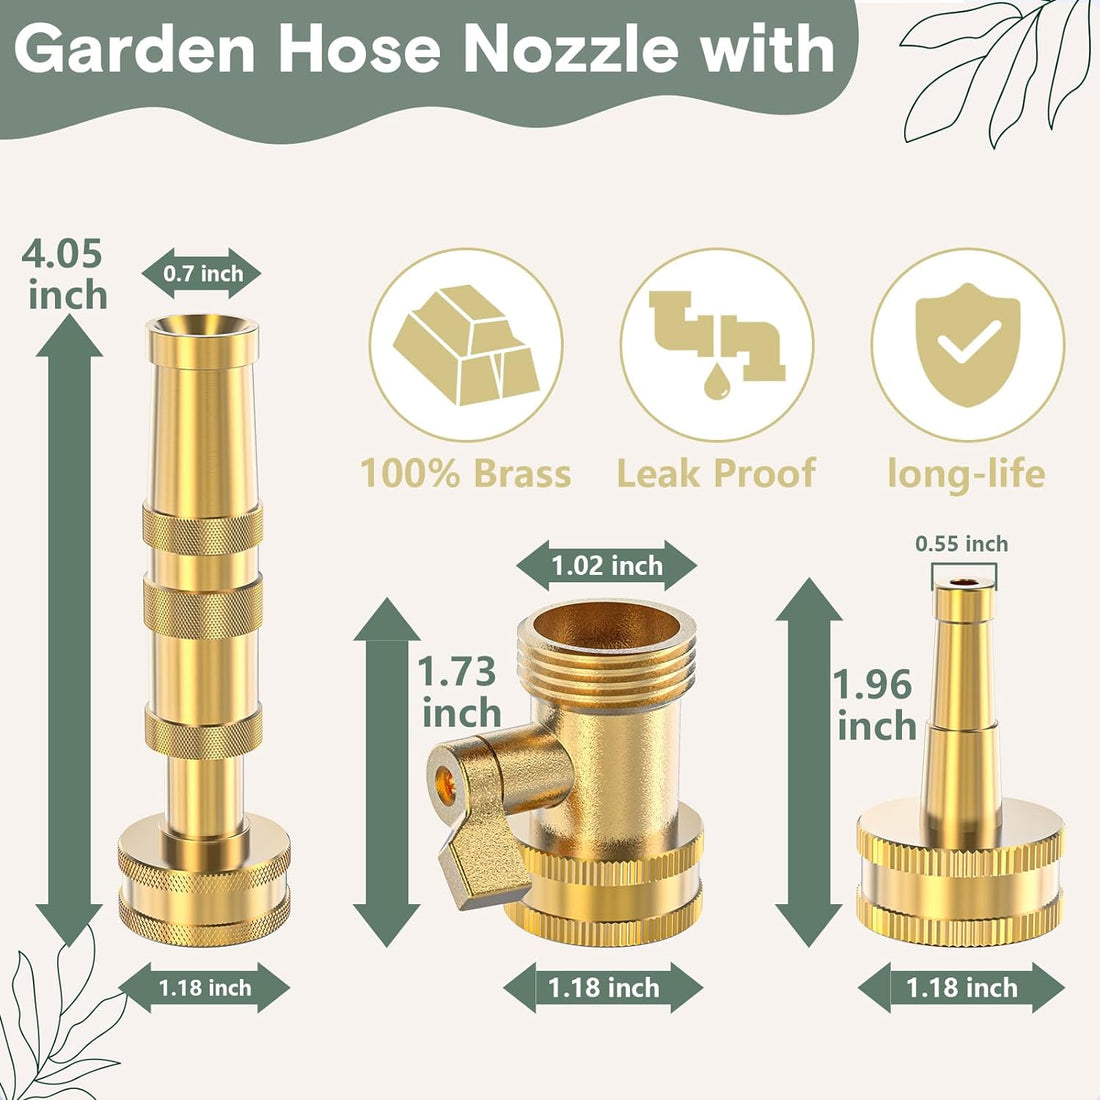 Twinkle Star Heavy-Duty Brass Adjustable Twist Hose Nozzle, High Pressure Hose Nozzle with On-Off Valve, Leak-Free Operation 3/4" GHT Connector 3 Pack